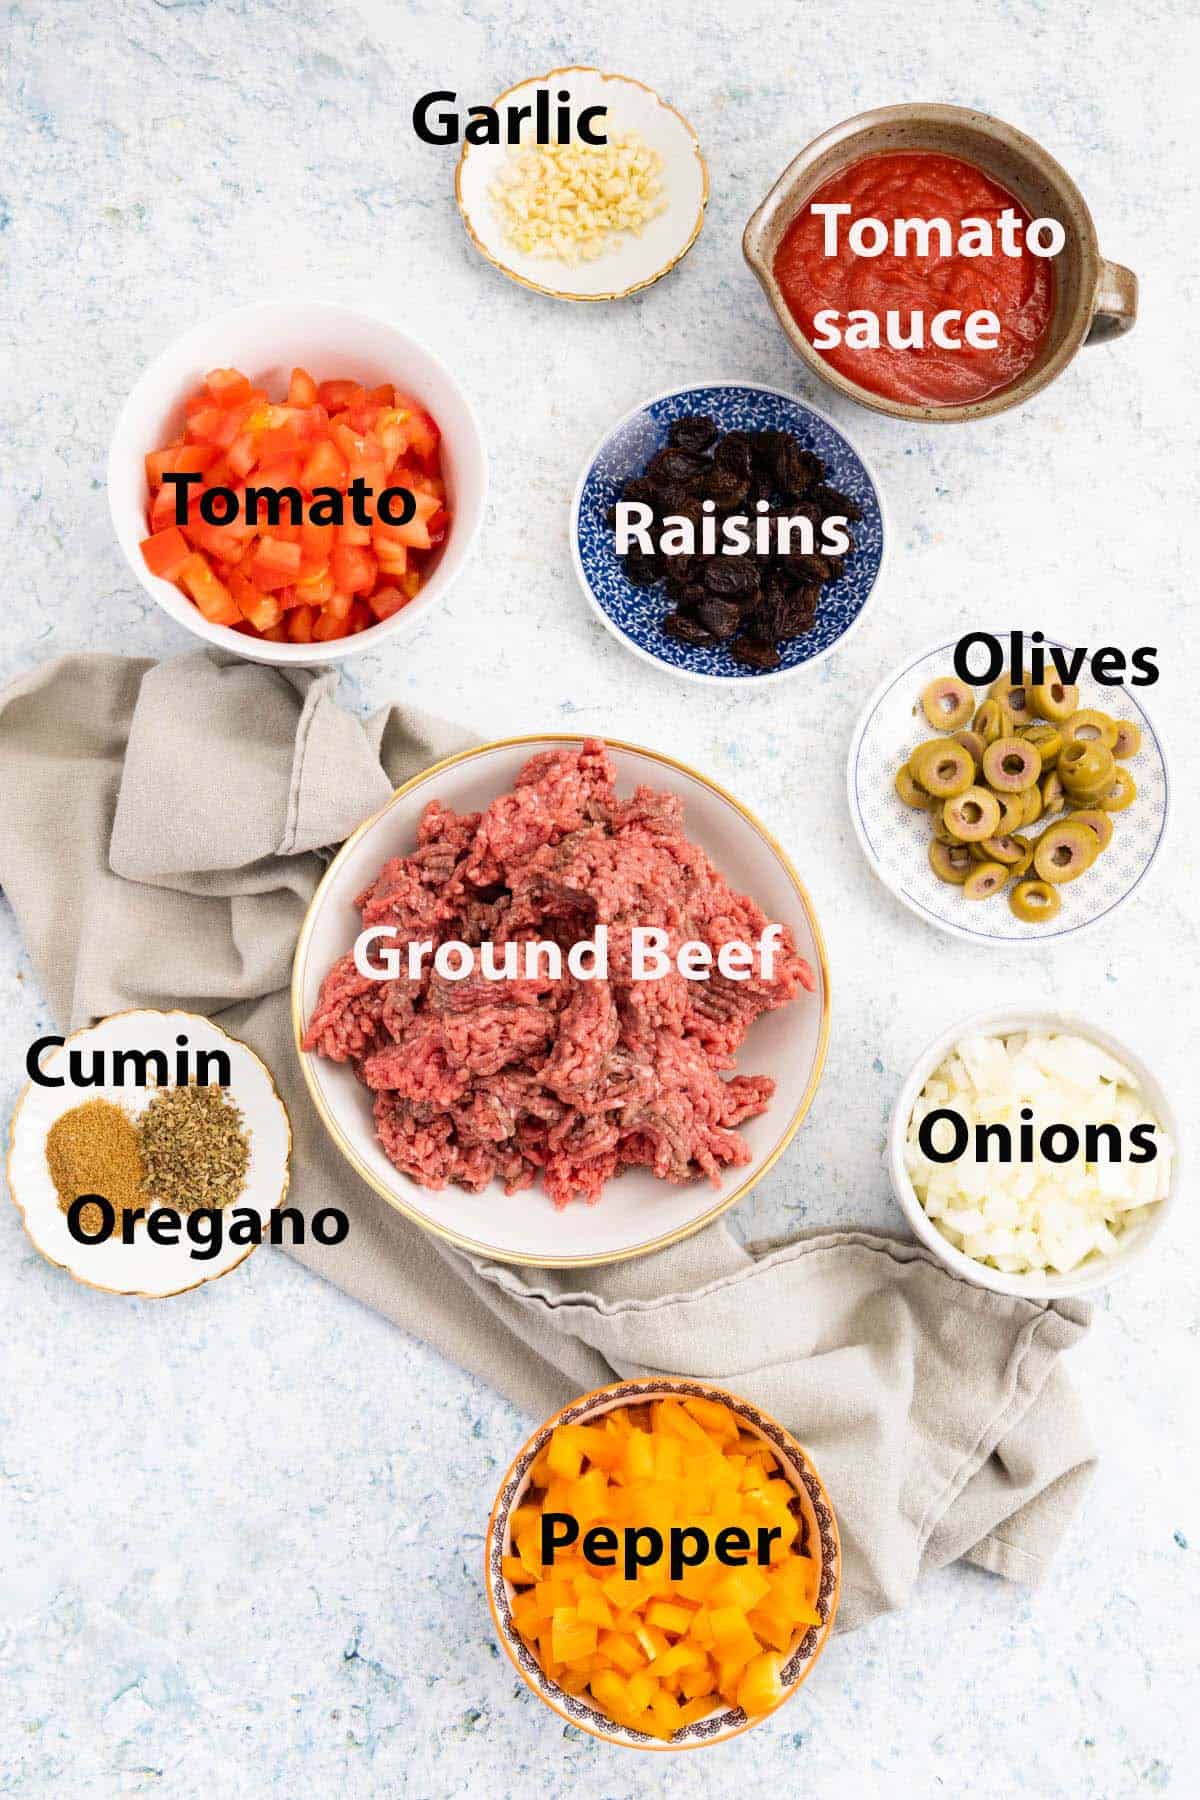 Ingredients in ramekins and small plates: garlic, tomato sauce, tomato, olives, ground beef, onions, pepper, cumin, oregano.